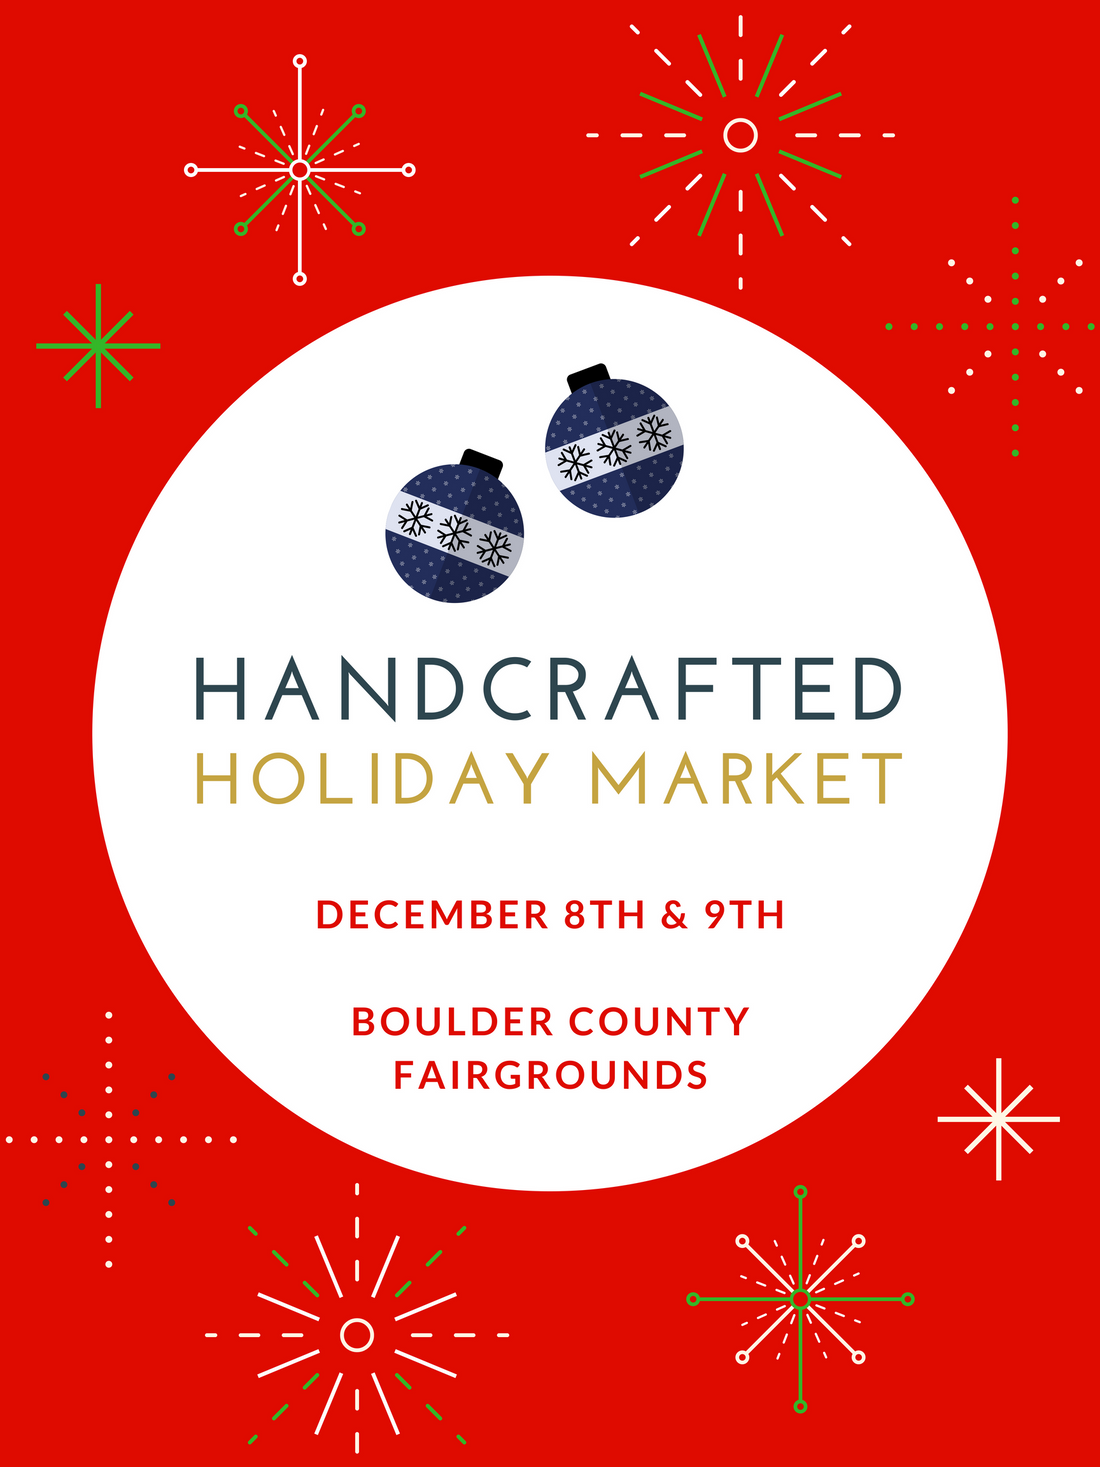 Handcrafted Holiday Market Announcement!!